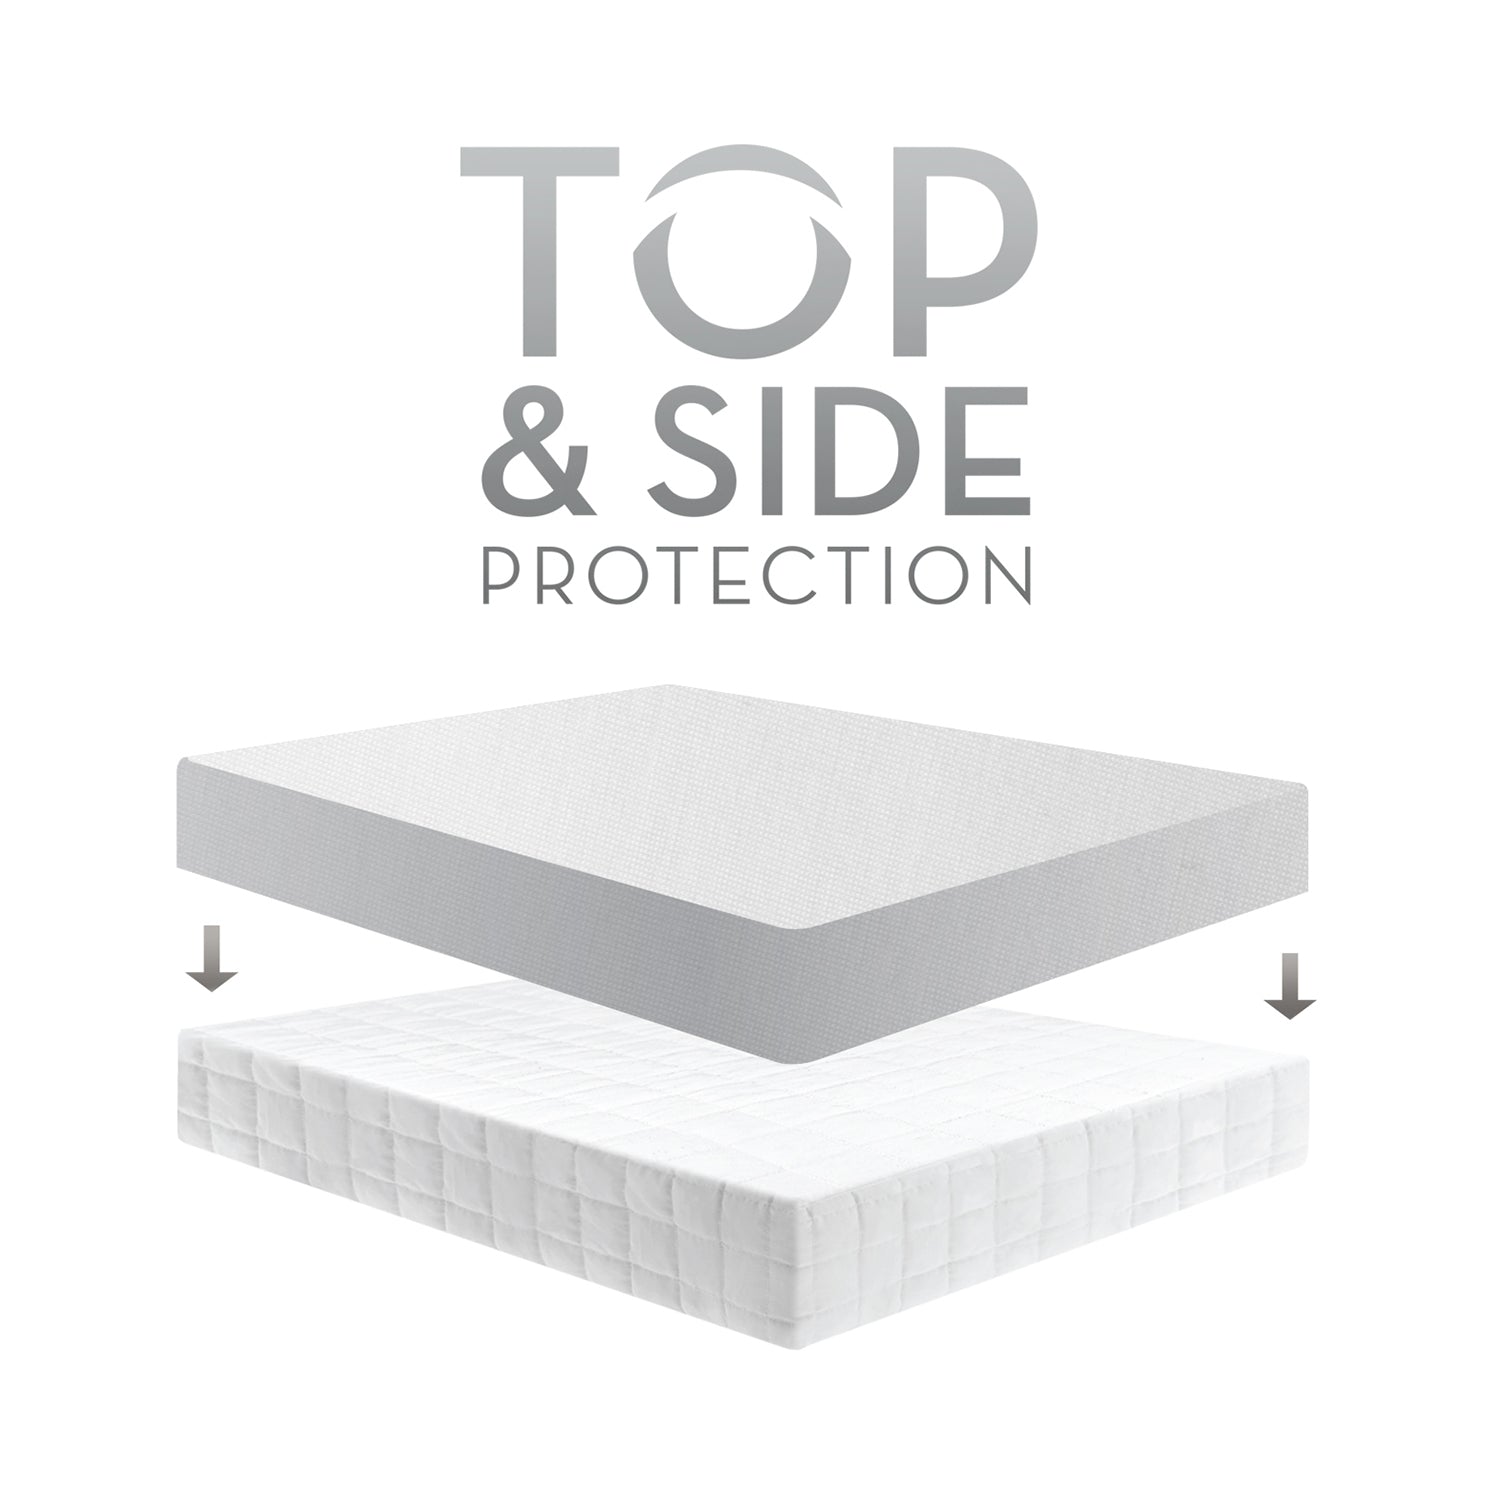 Sleep Tite FIVE 5IDED® Mattress Protector with Tencel™ + Omniphase®